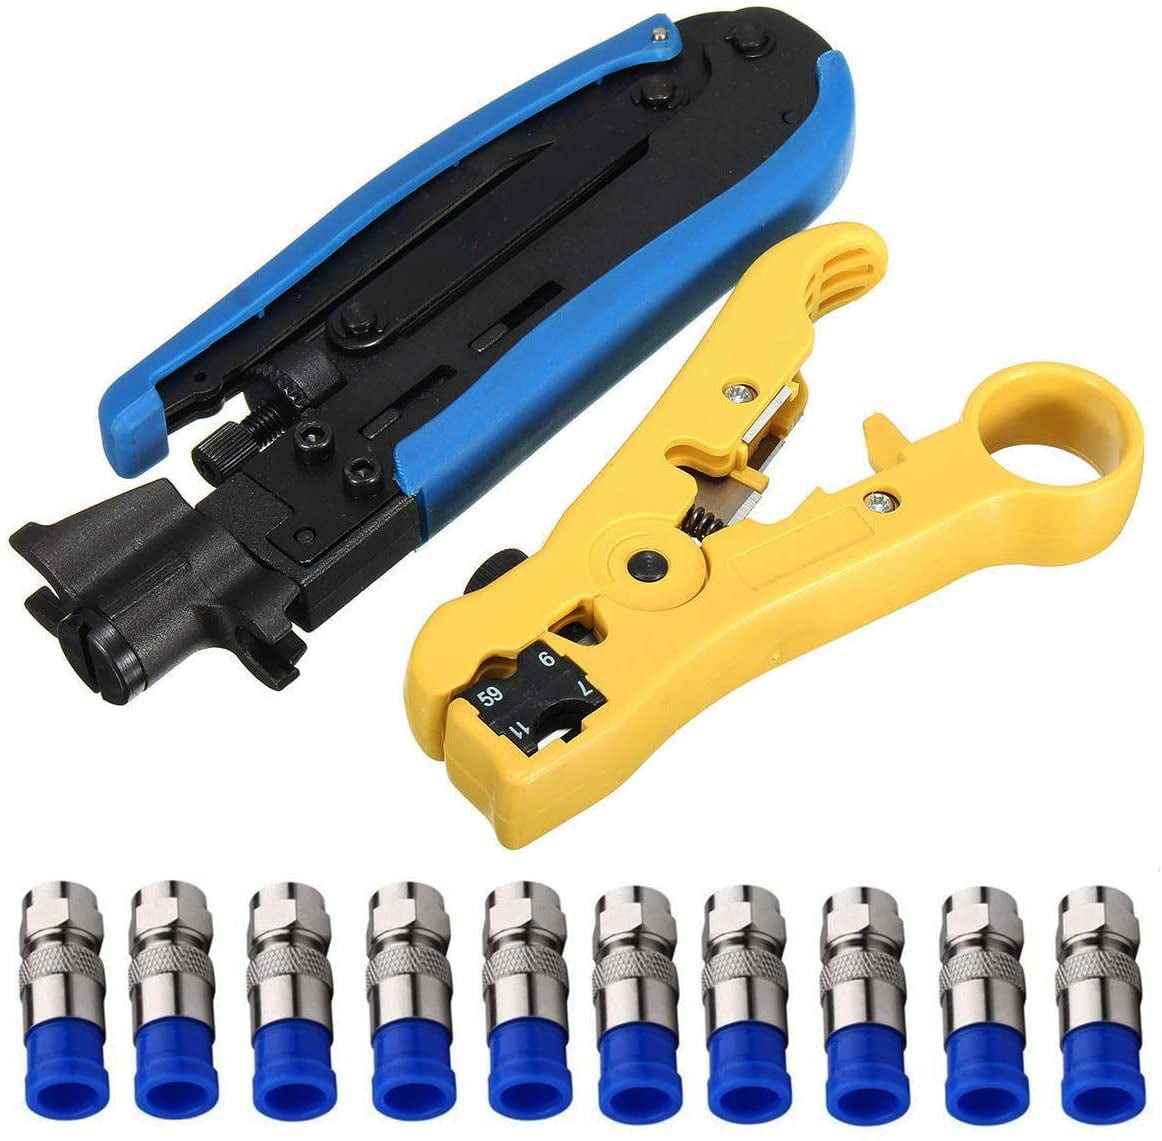 Cable Wire Stripper Cutter Tool For RJ45 Ethernet Network Coax Coaxial RG6 RG59 